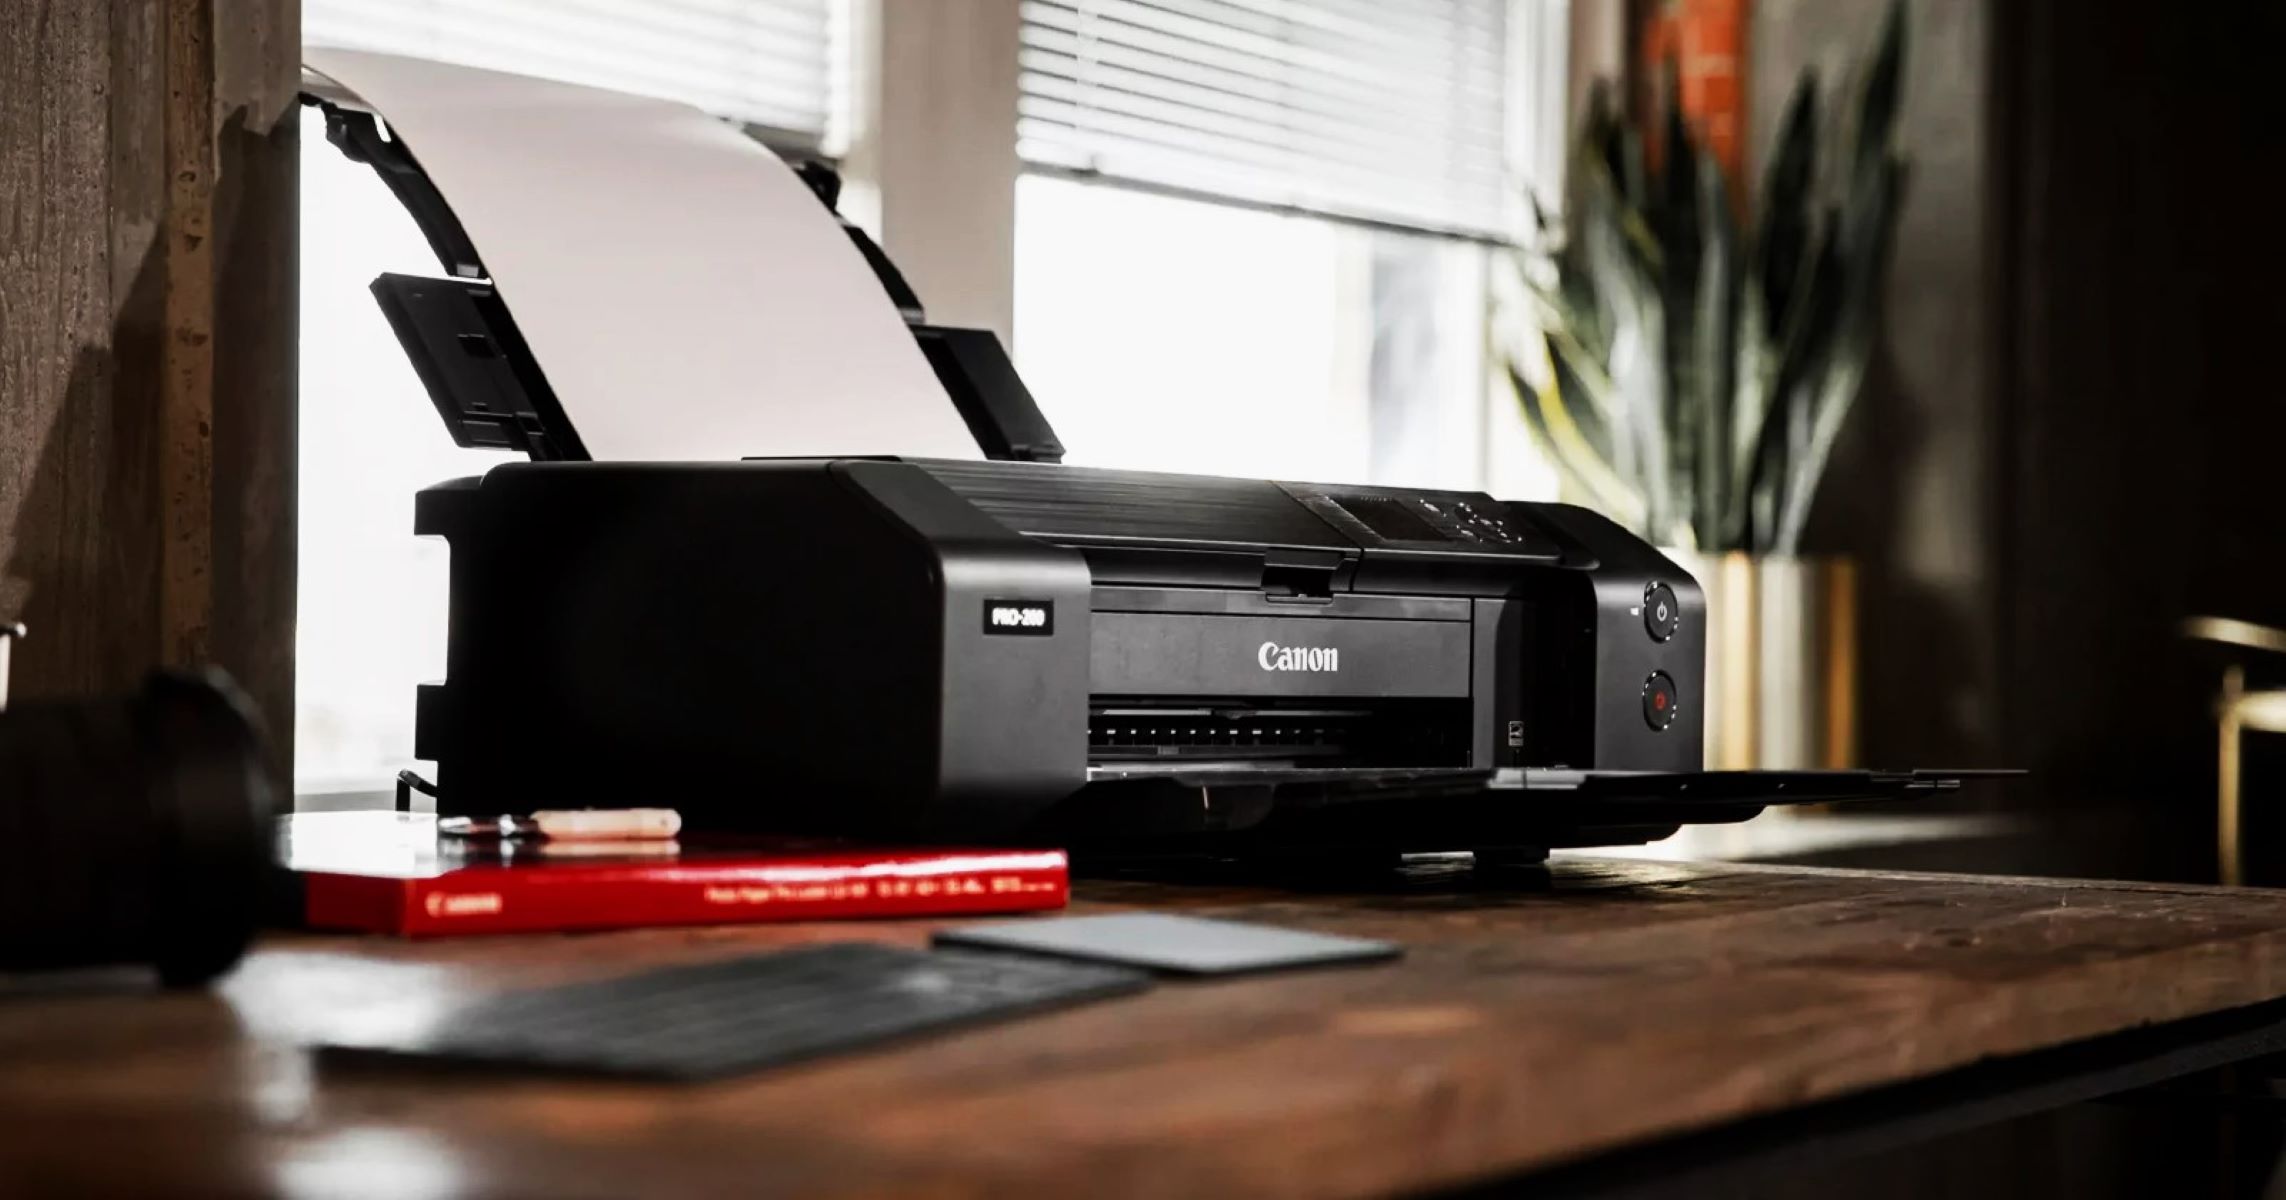 How To Scan Documents On A Canon Printer